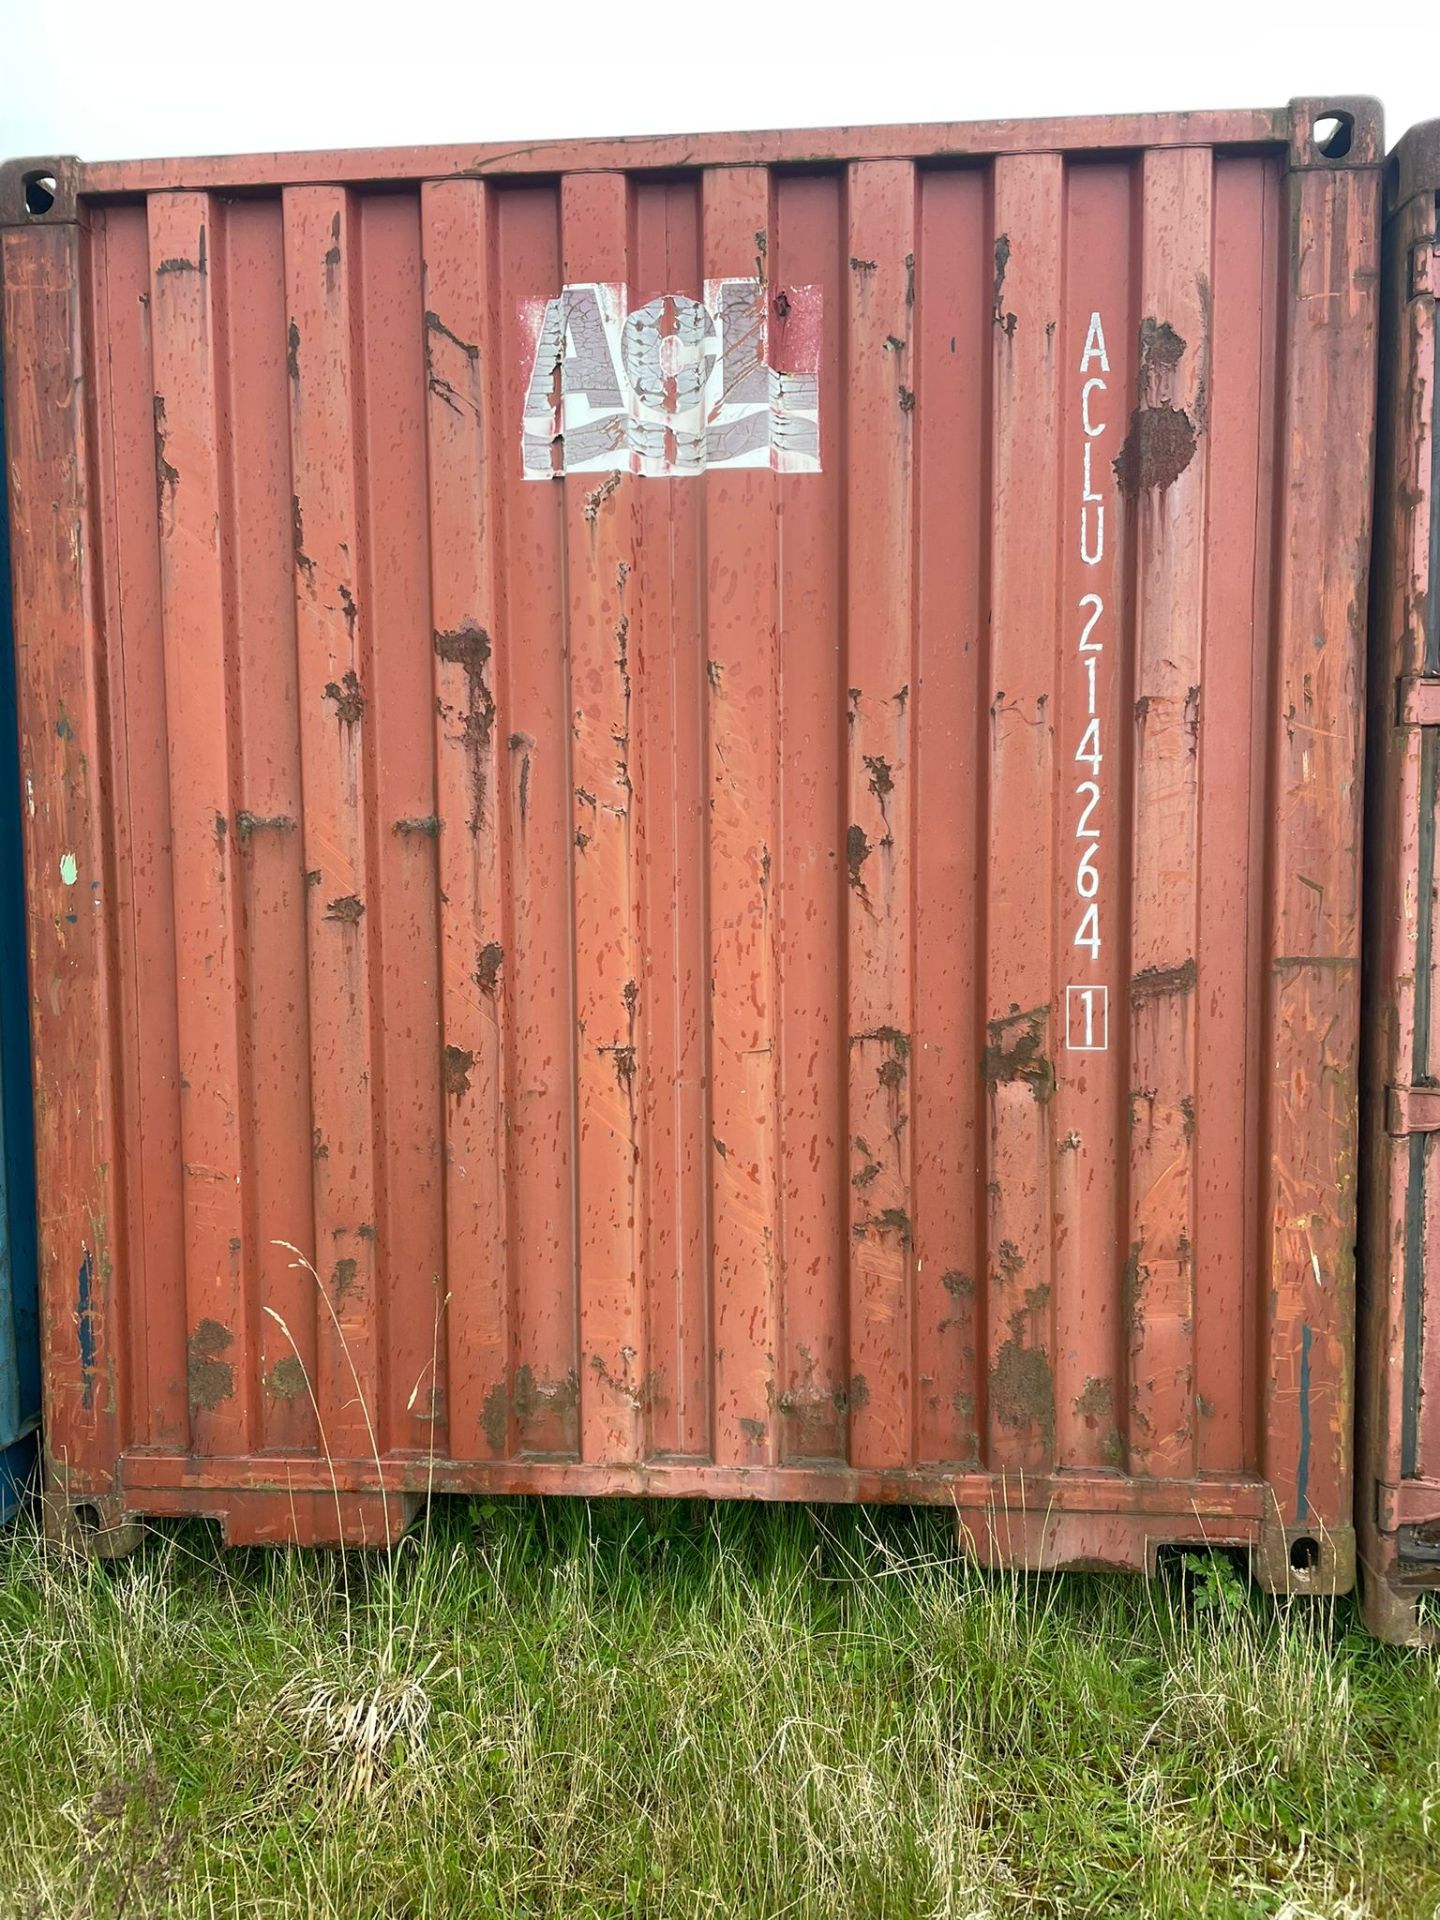 Shipping Container - ref ACLU2142641 - NO RESERVE (40’ GP - Standard) - Image 4 of 4